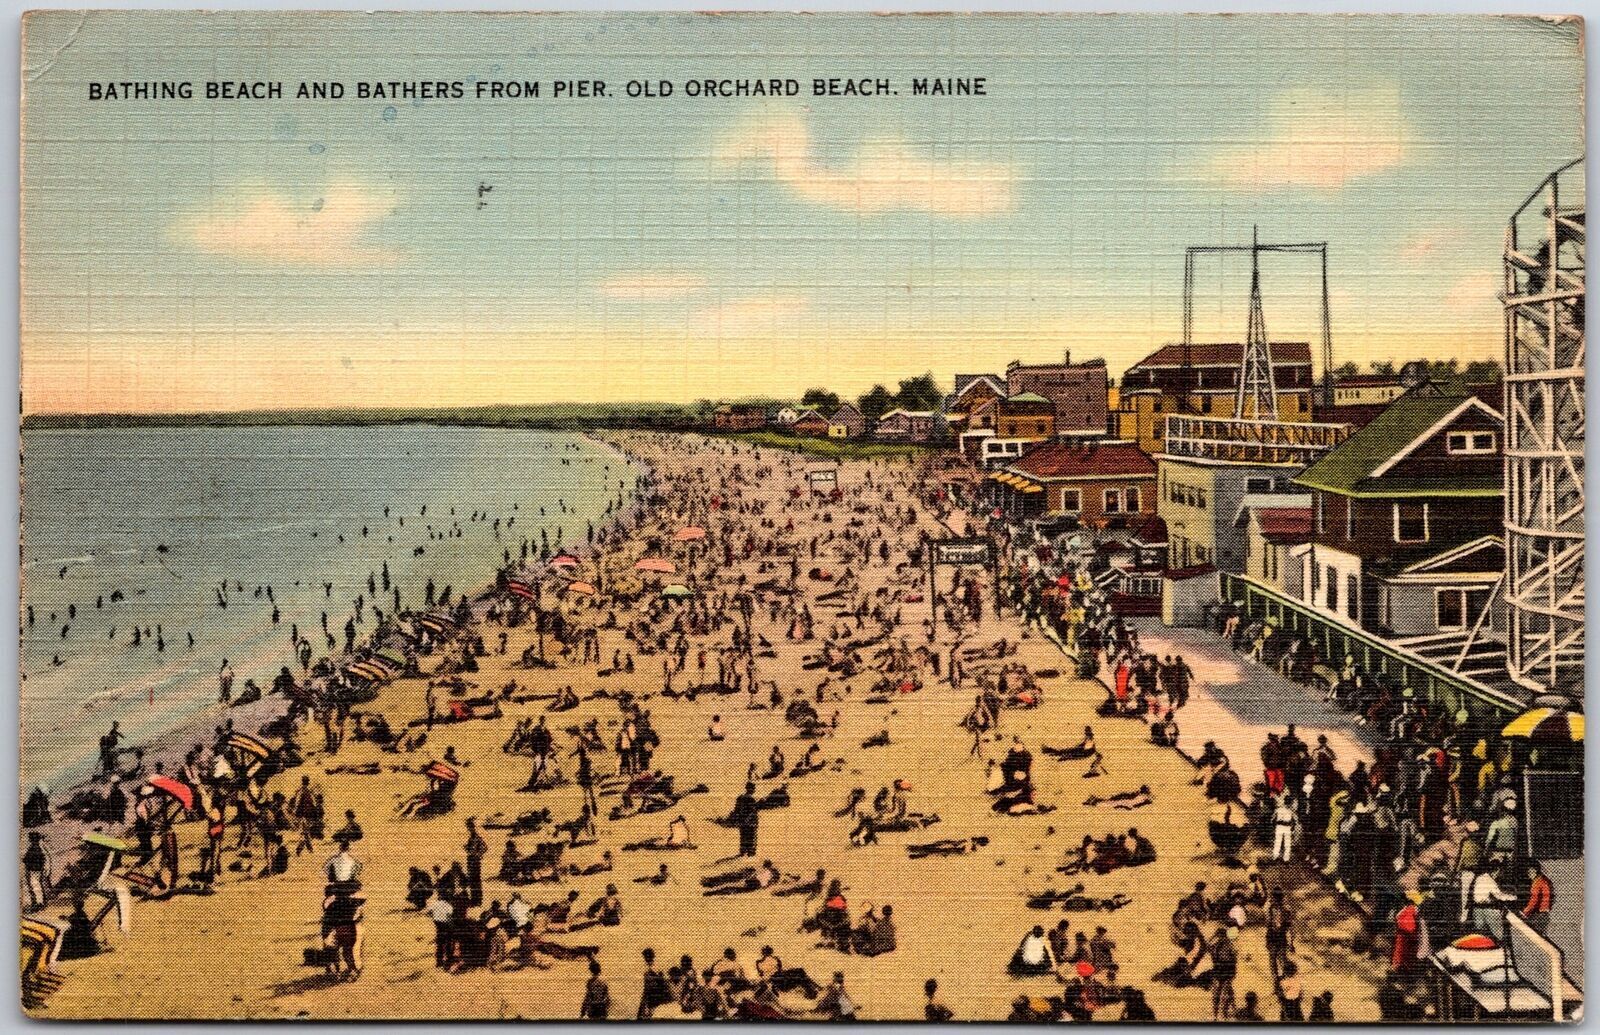 1941 Bathing Beach And Bathers From Pier Old Orchard Beach Maine Posted Postcard